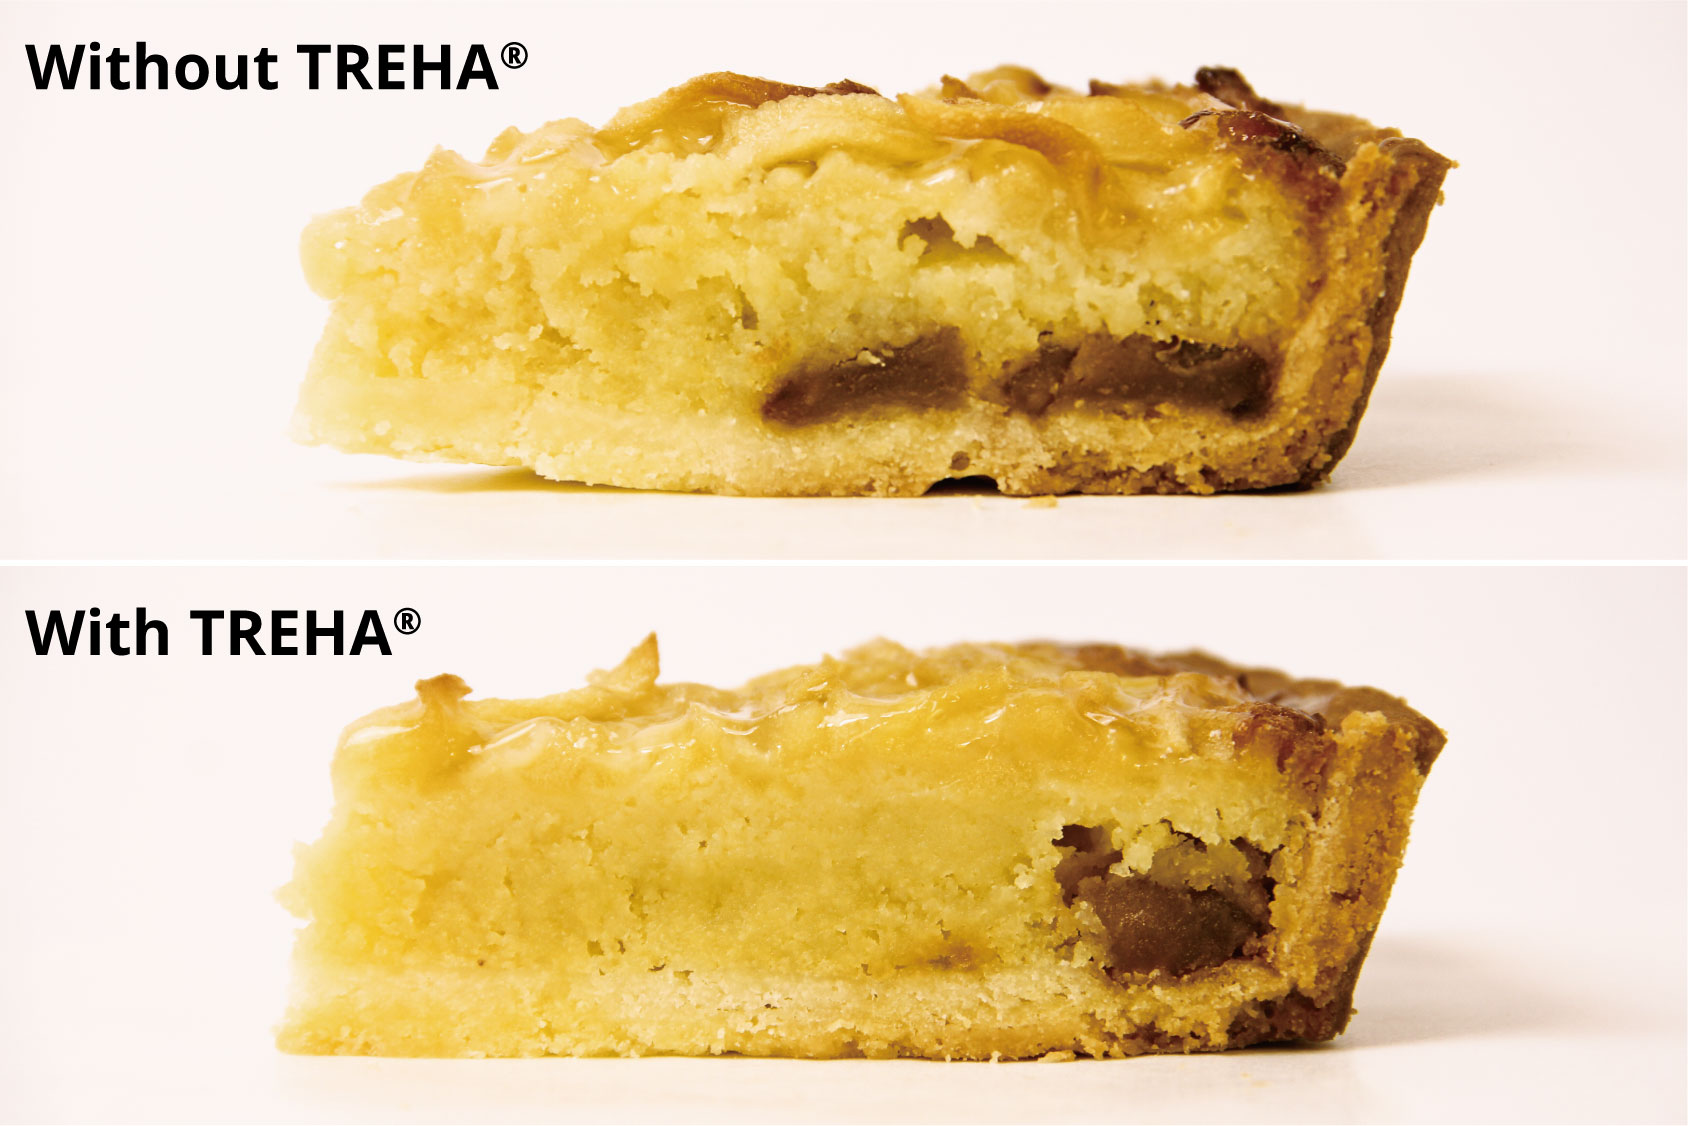 Cross section of the tart. The piece of tart with TREHA shows a finer cross section because TREHA retains moisture in the apple preserves during baking. 